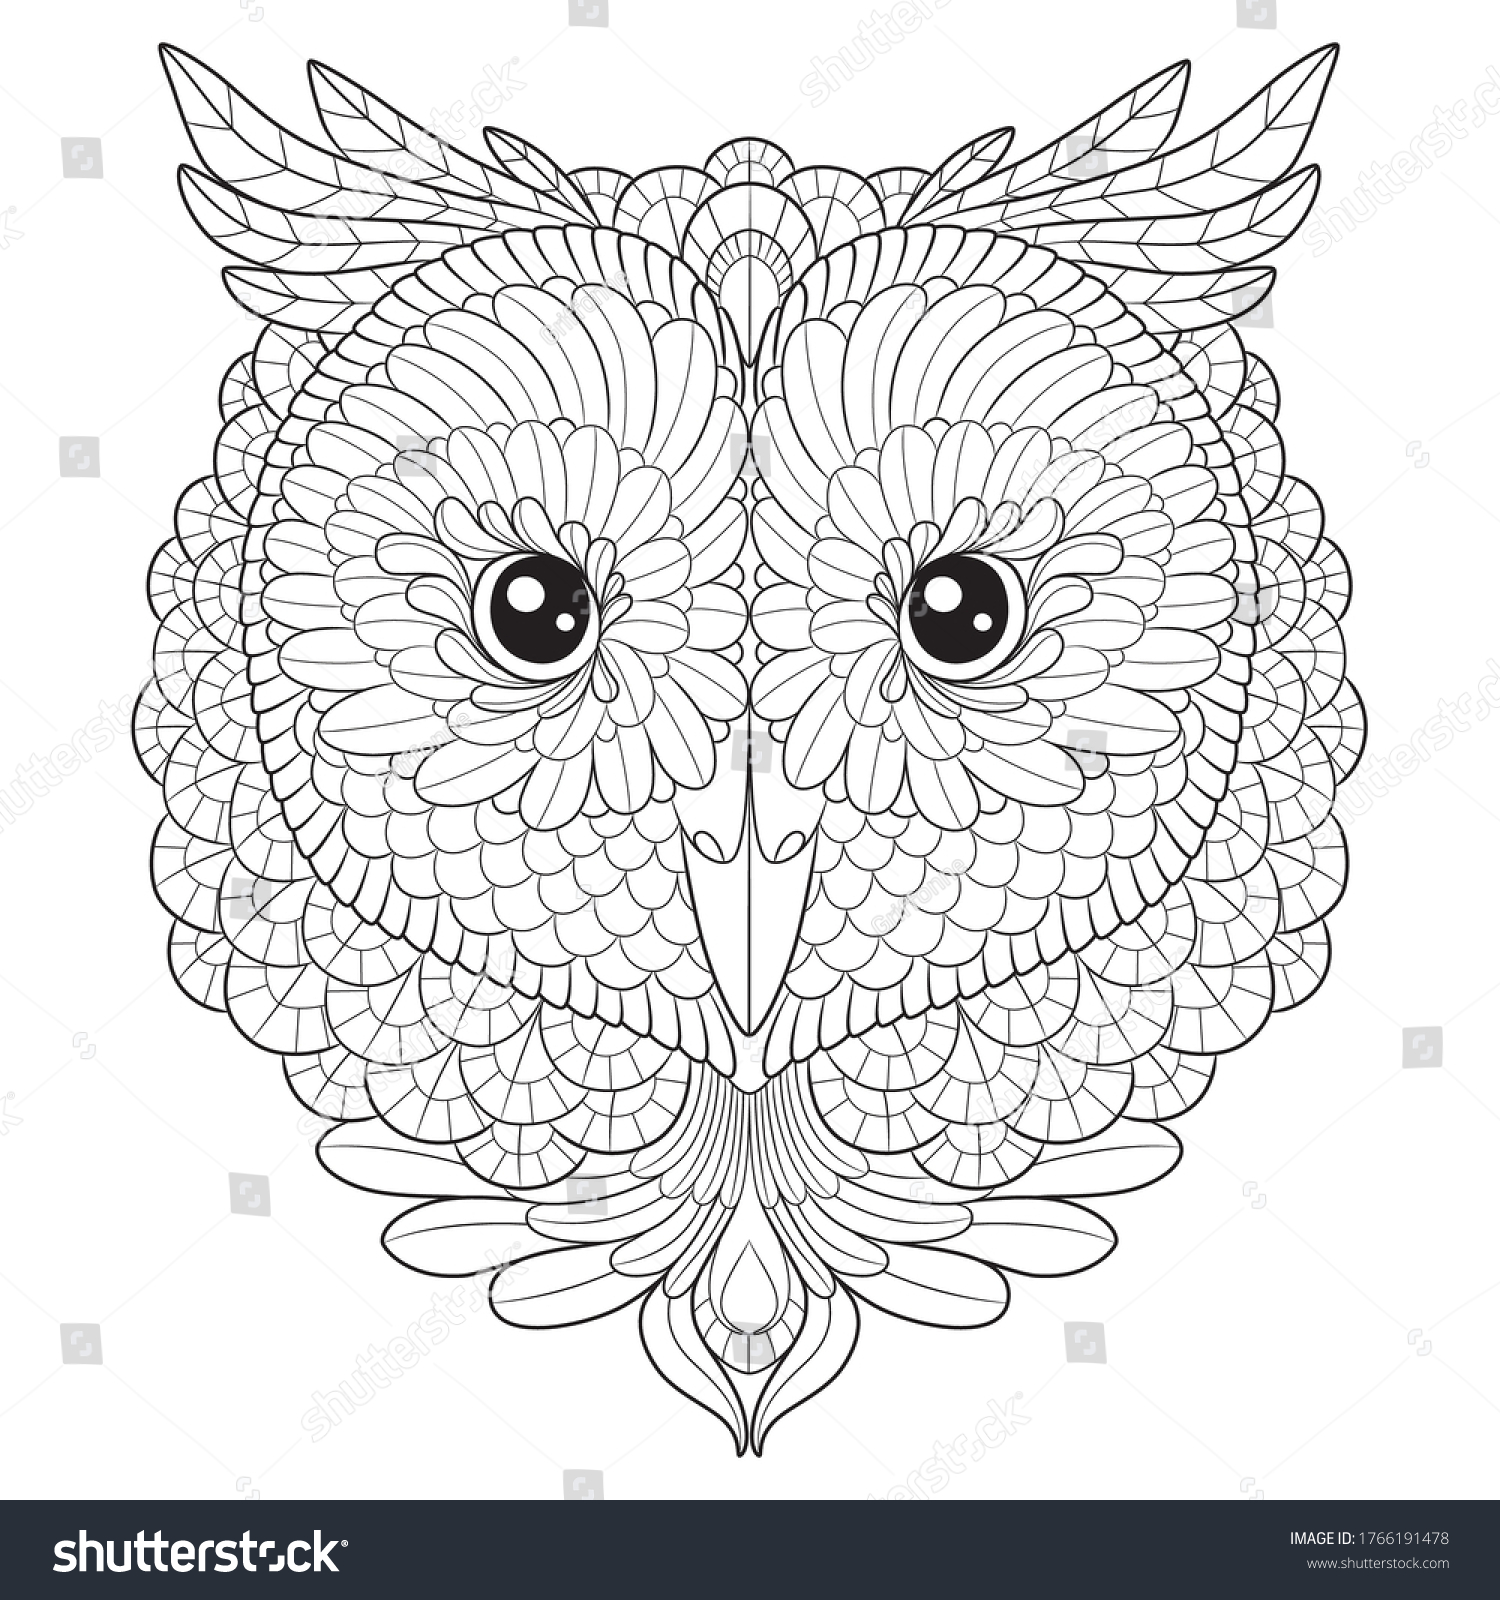 Owl head vector graphic adult coloring stock vector royalty free